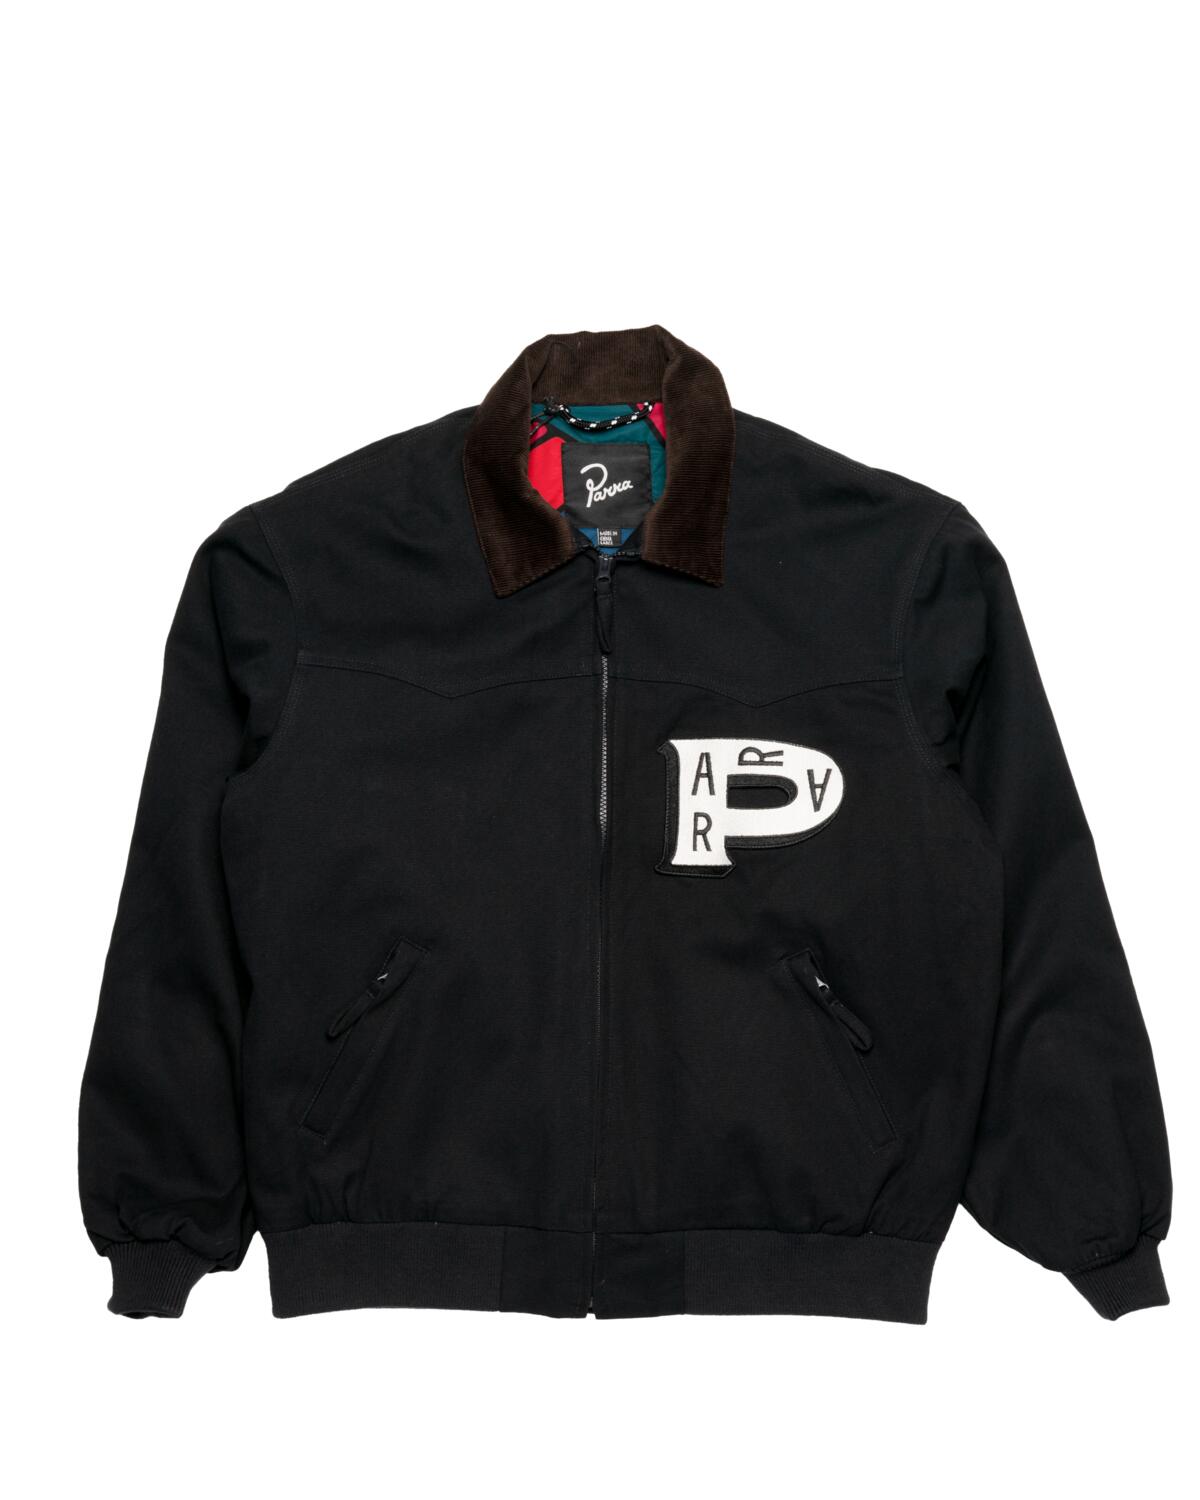 by Parra Worked P Jacket | 48131 | AFEW STORE